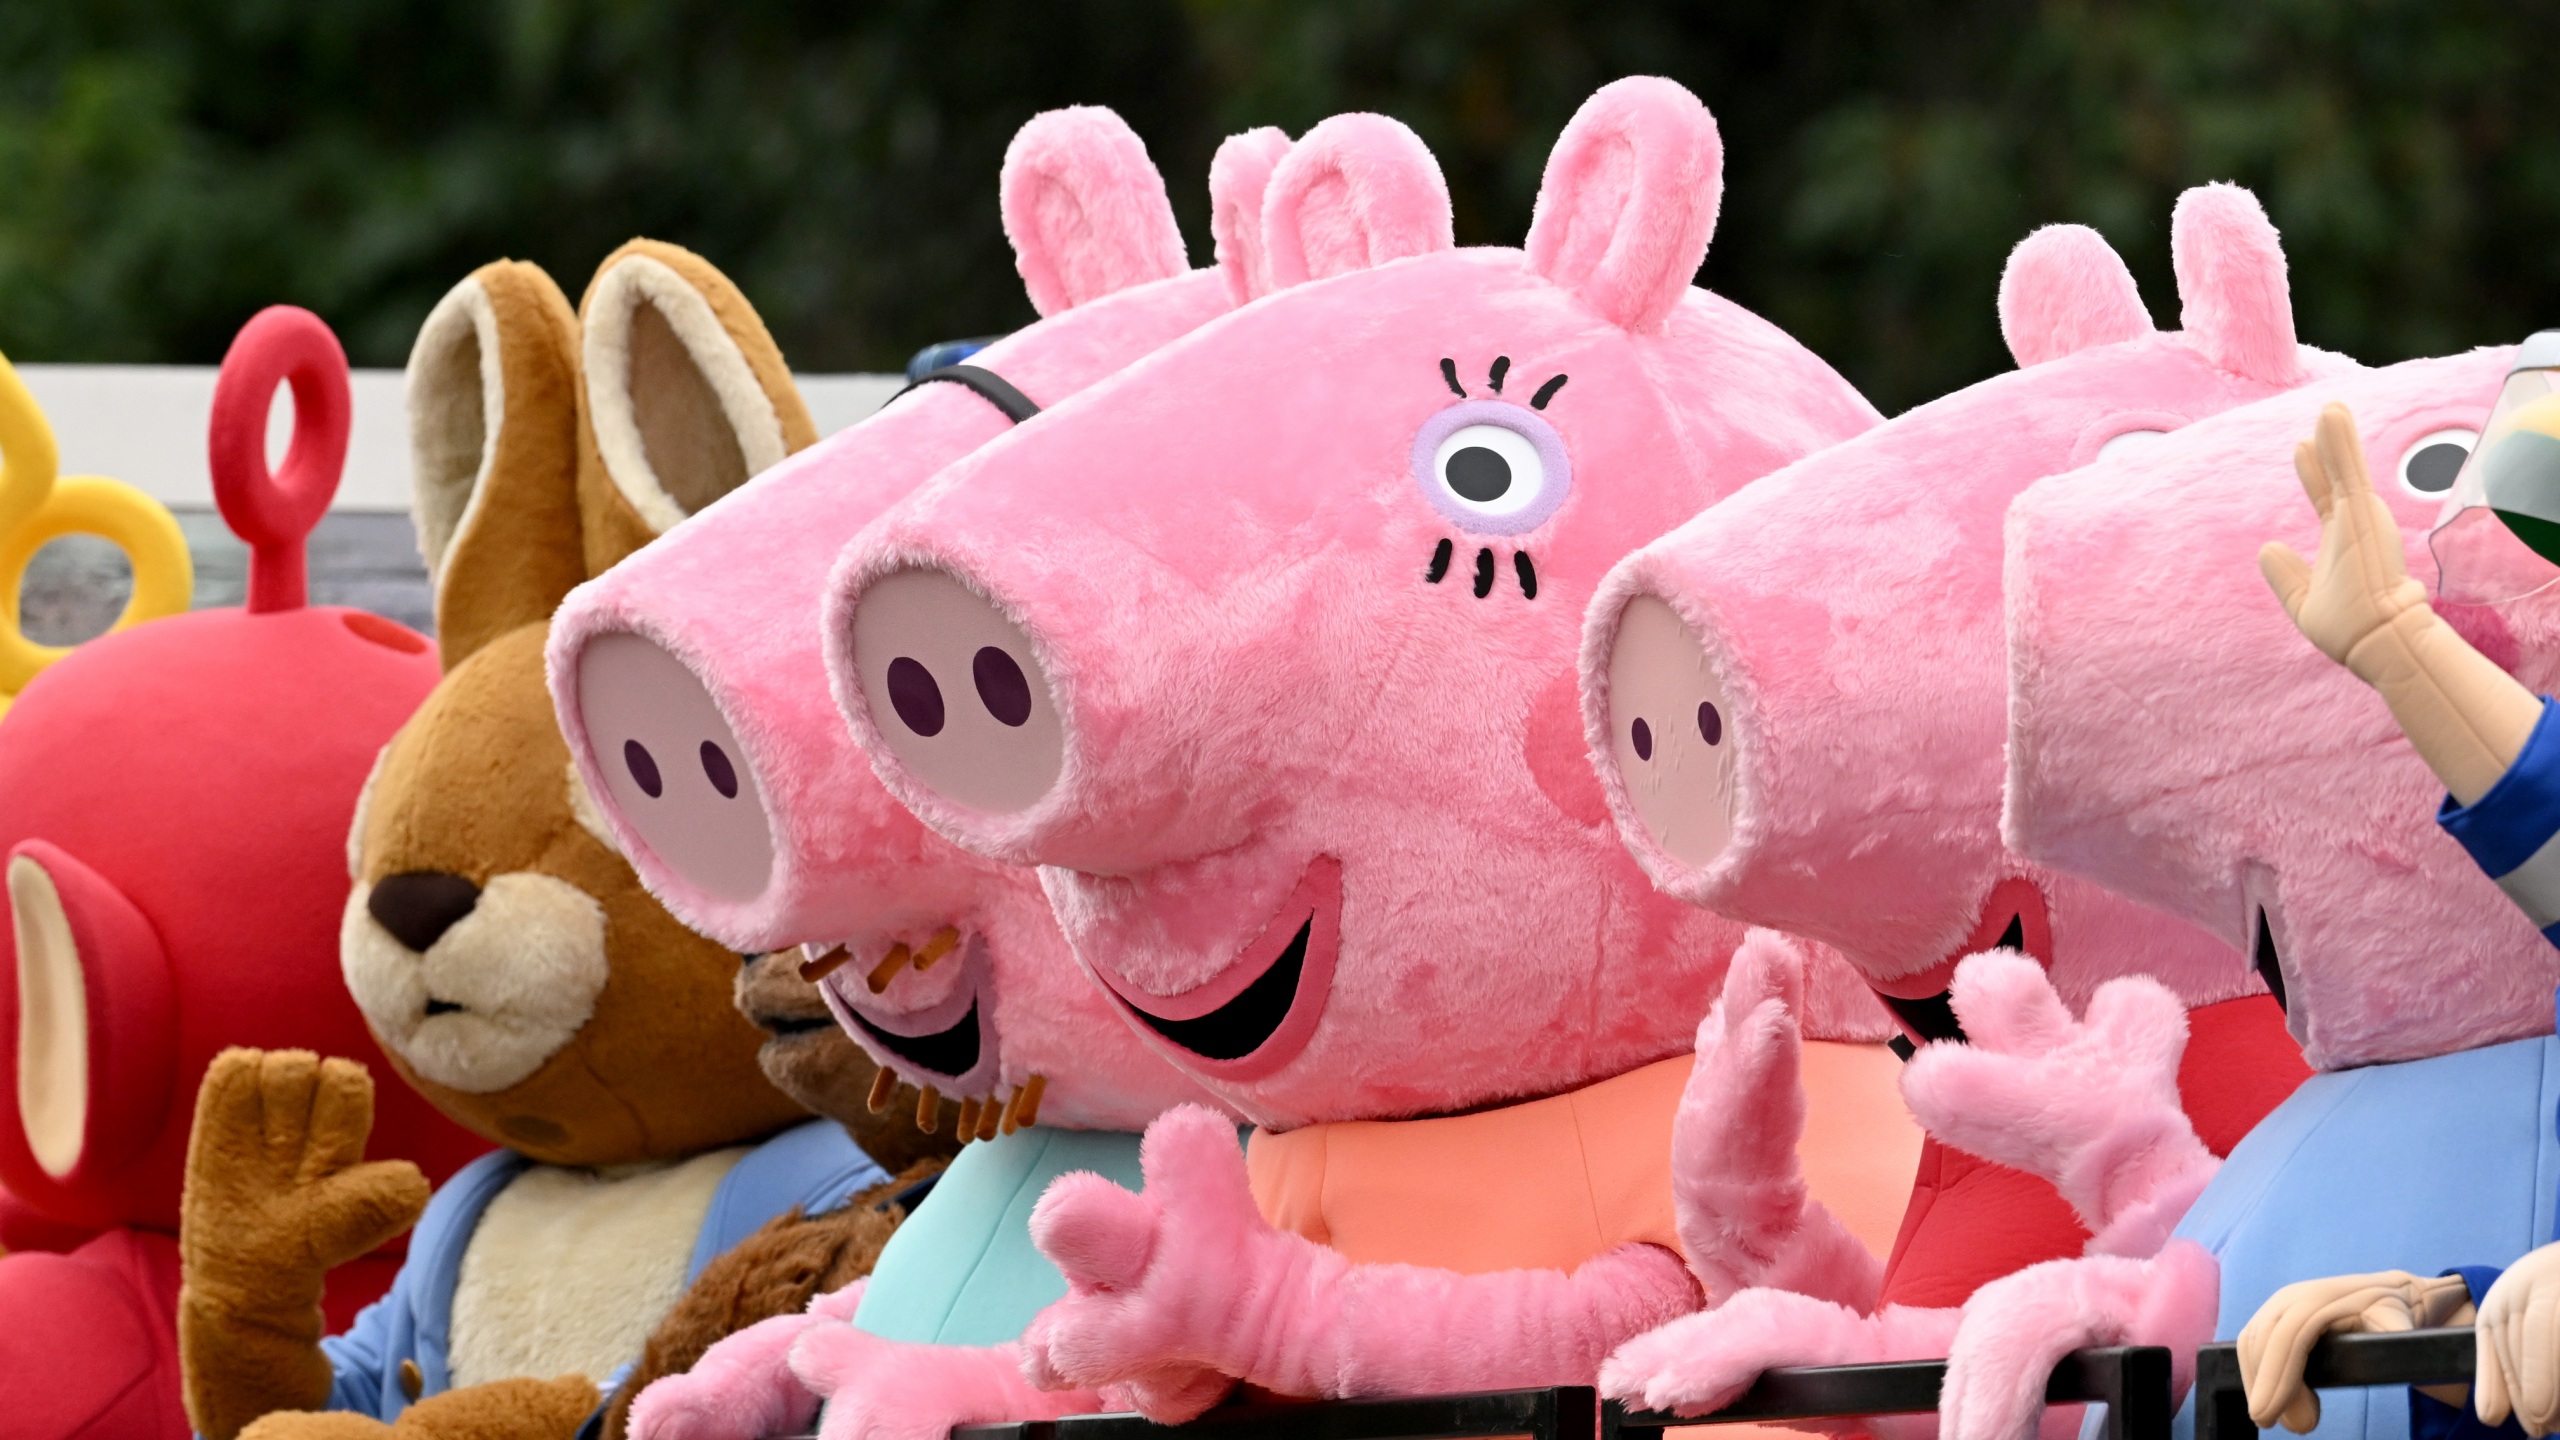 Peppa Pig Live! travels across the pond to the fairgrounds